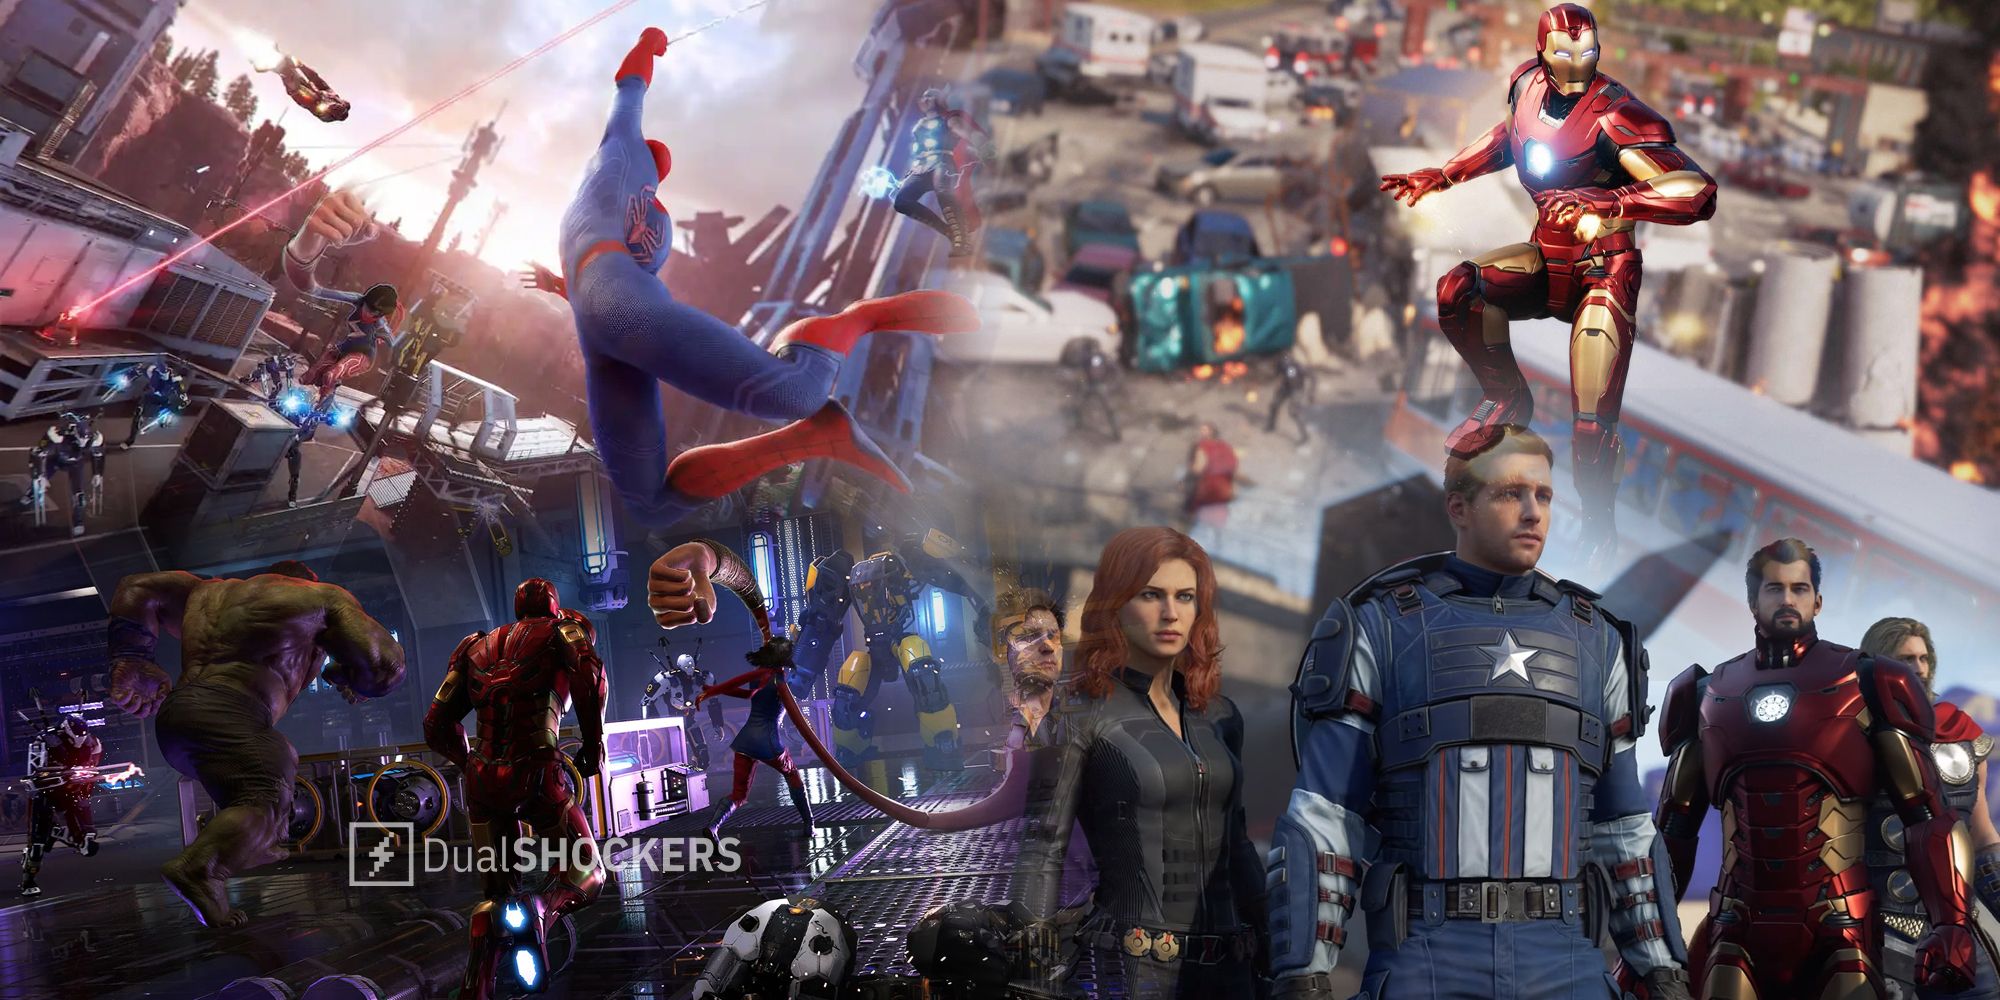 Continue to Play at Home with New Activities from Marvel Games